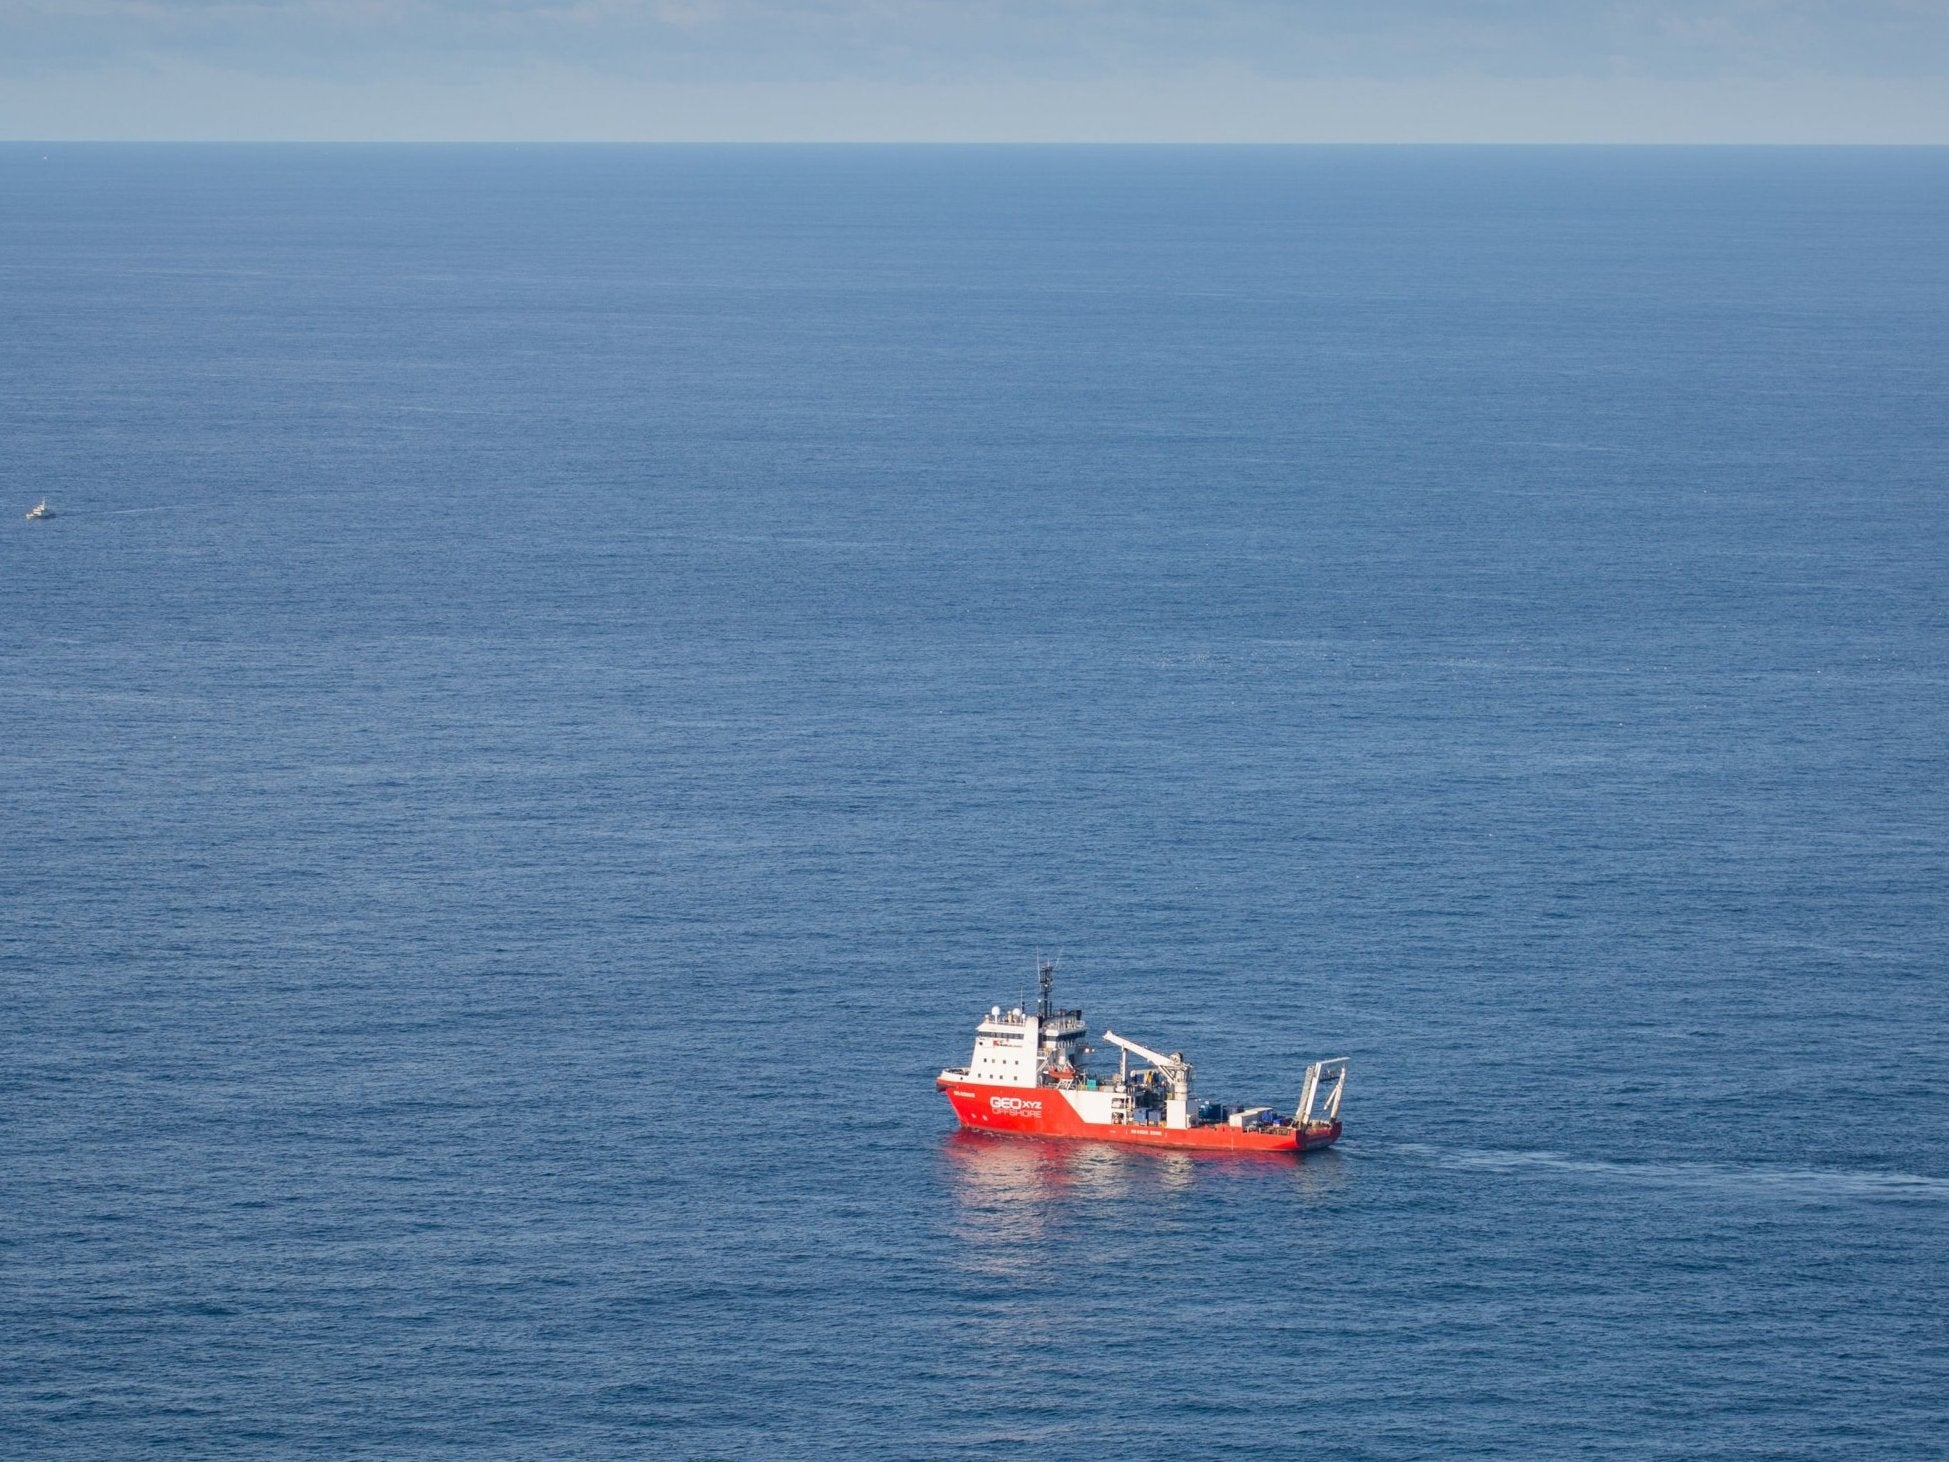 The search vessel near the site where the wreckage was found